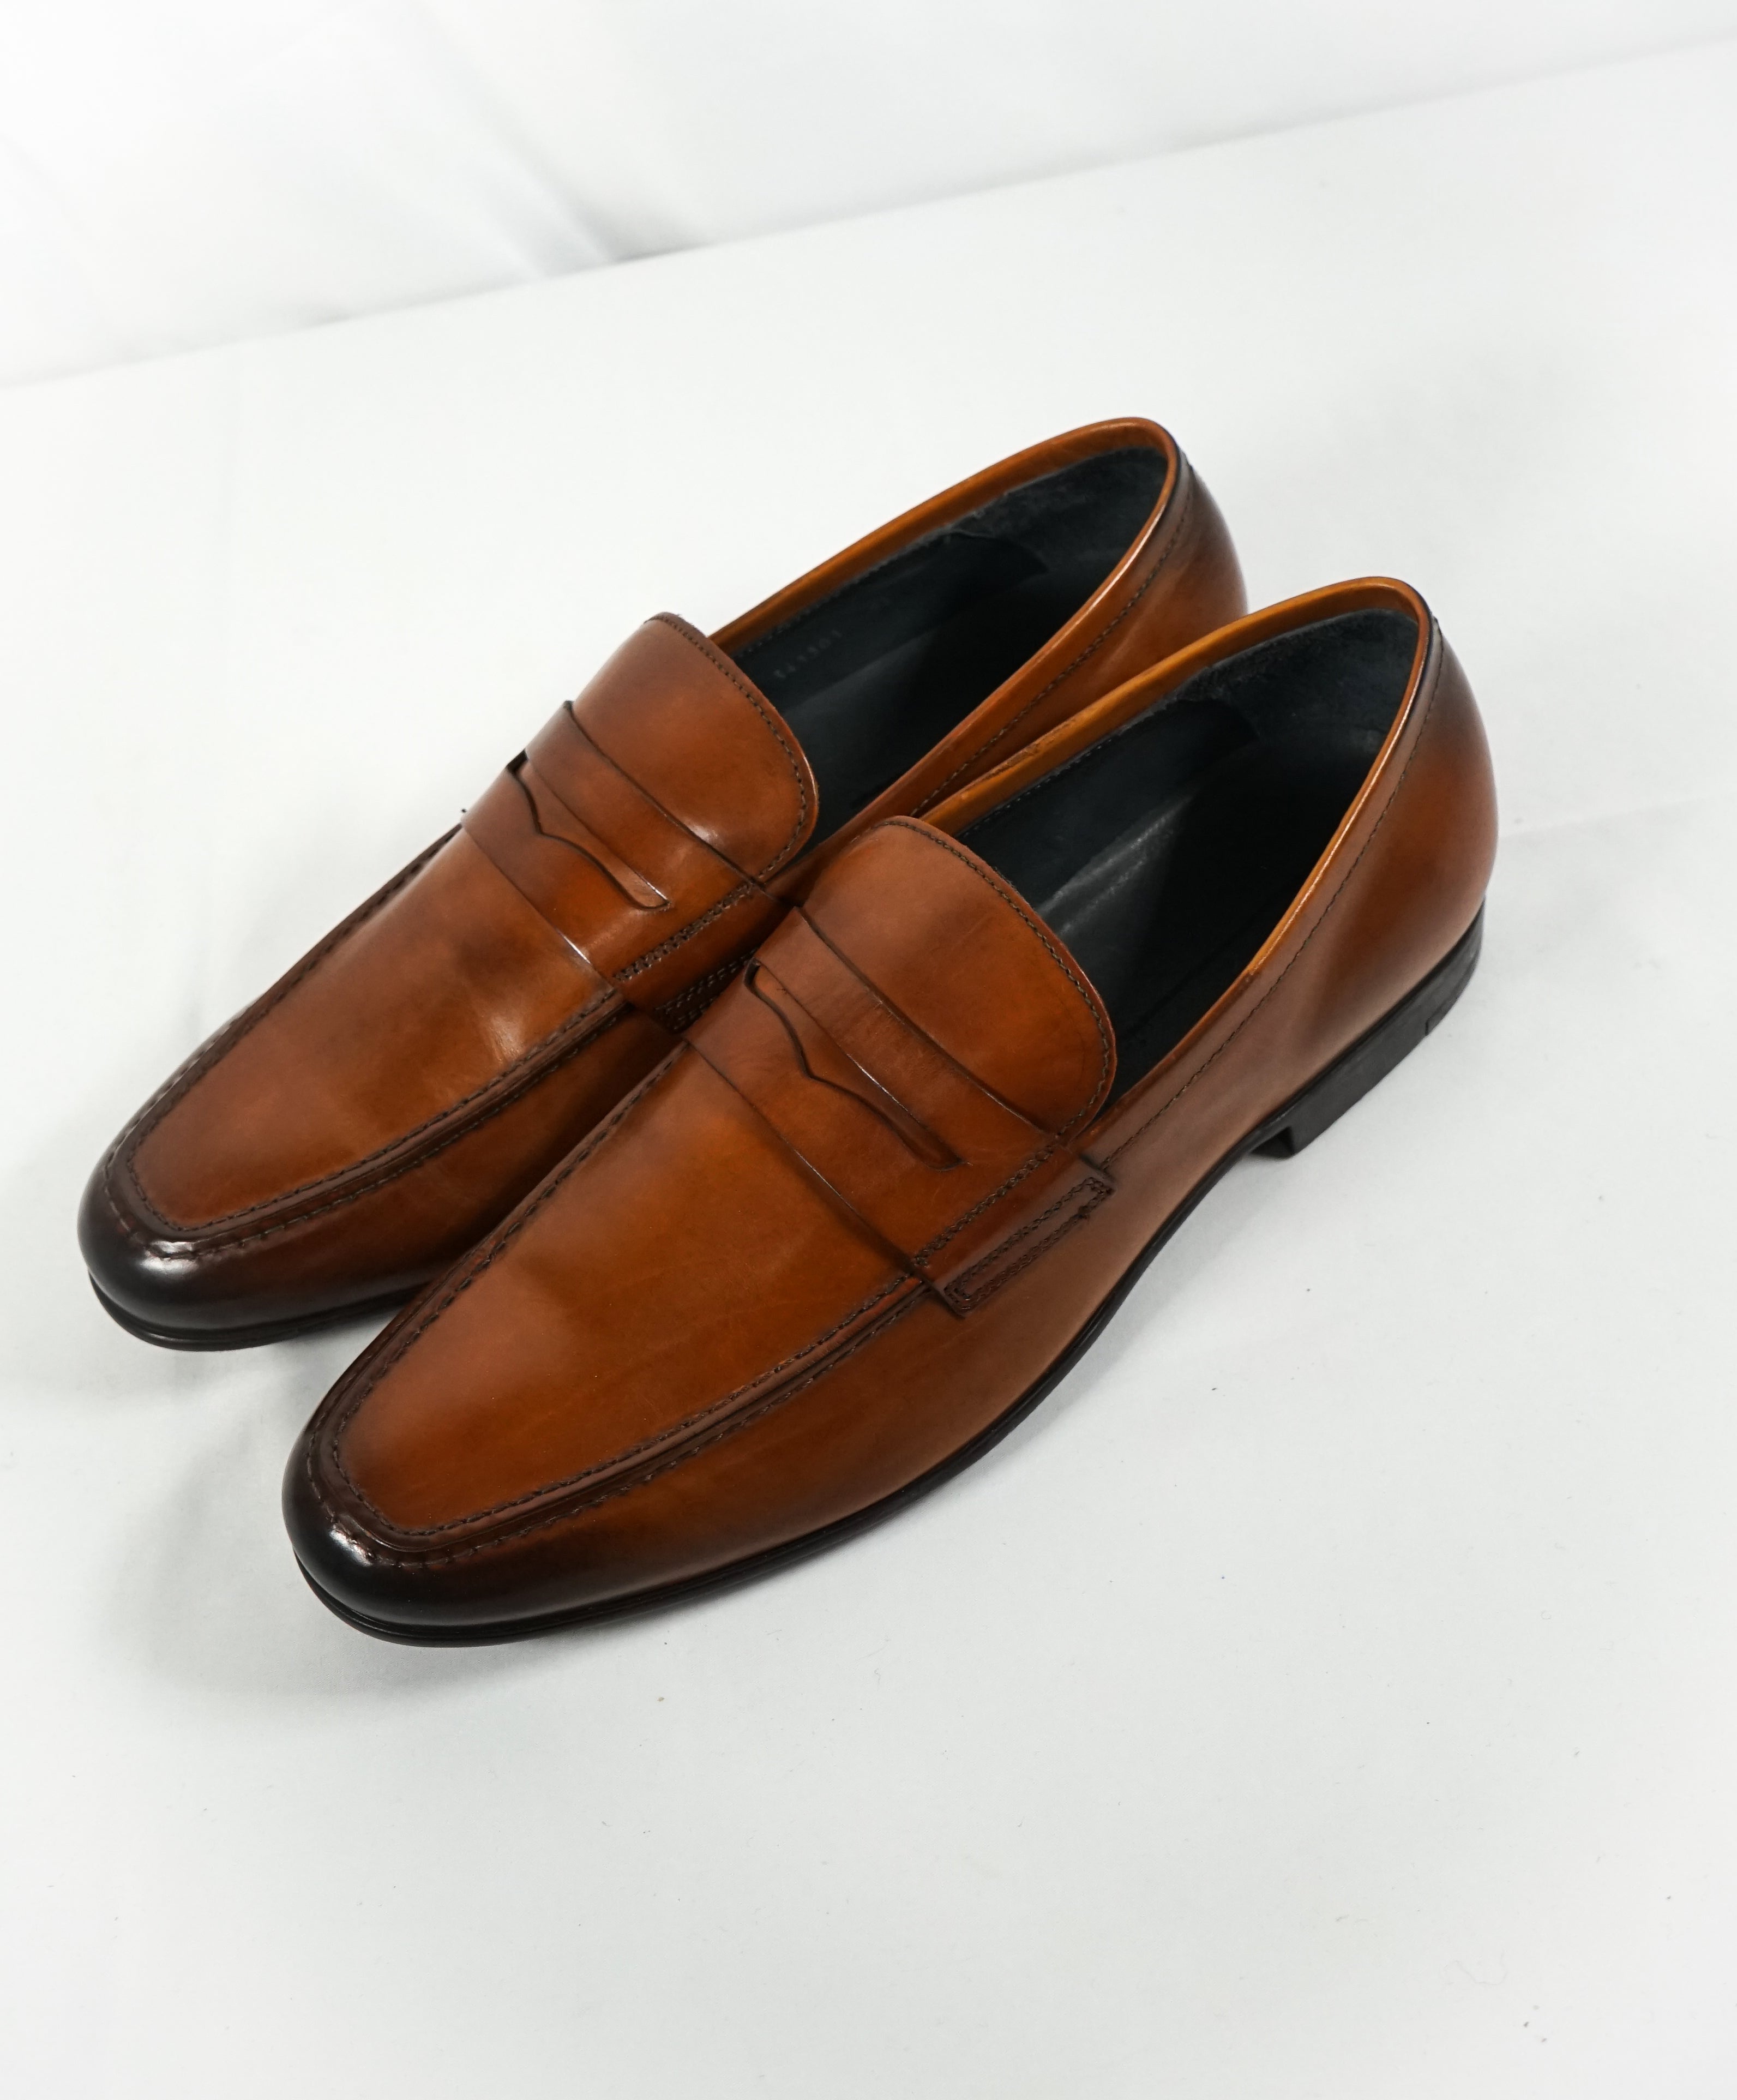 to boot new york loafers